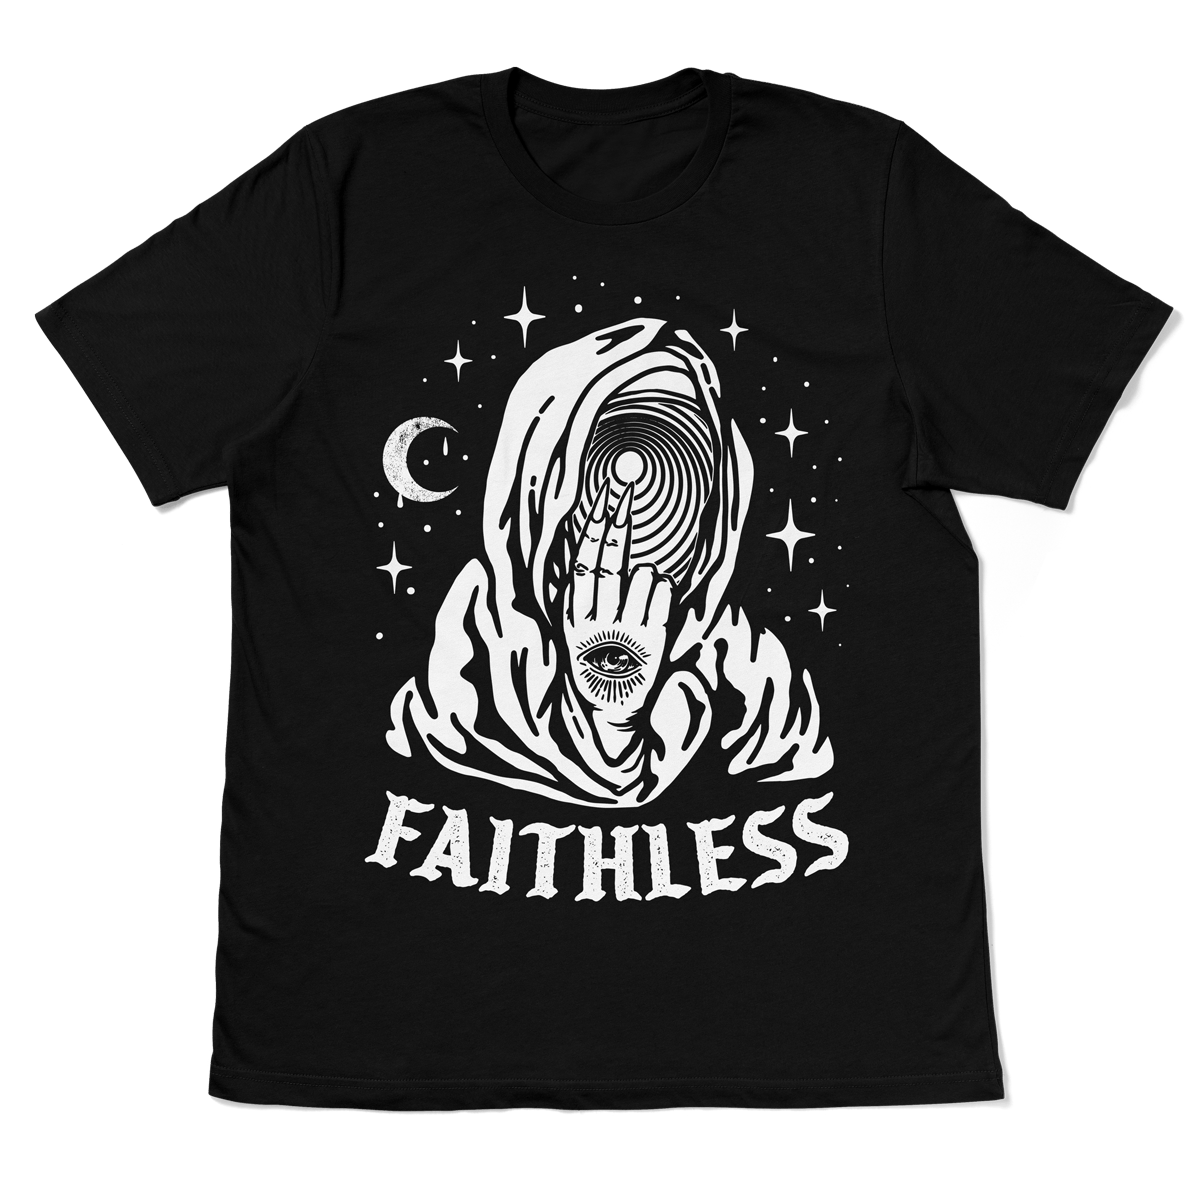 Faithless Tee - From The Morgue Apparel